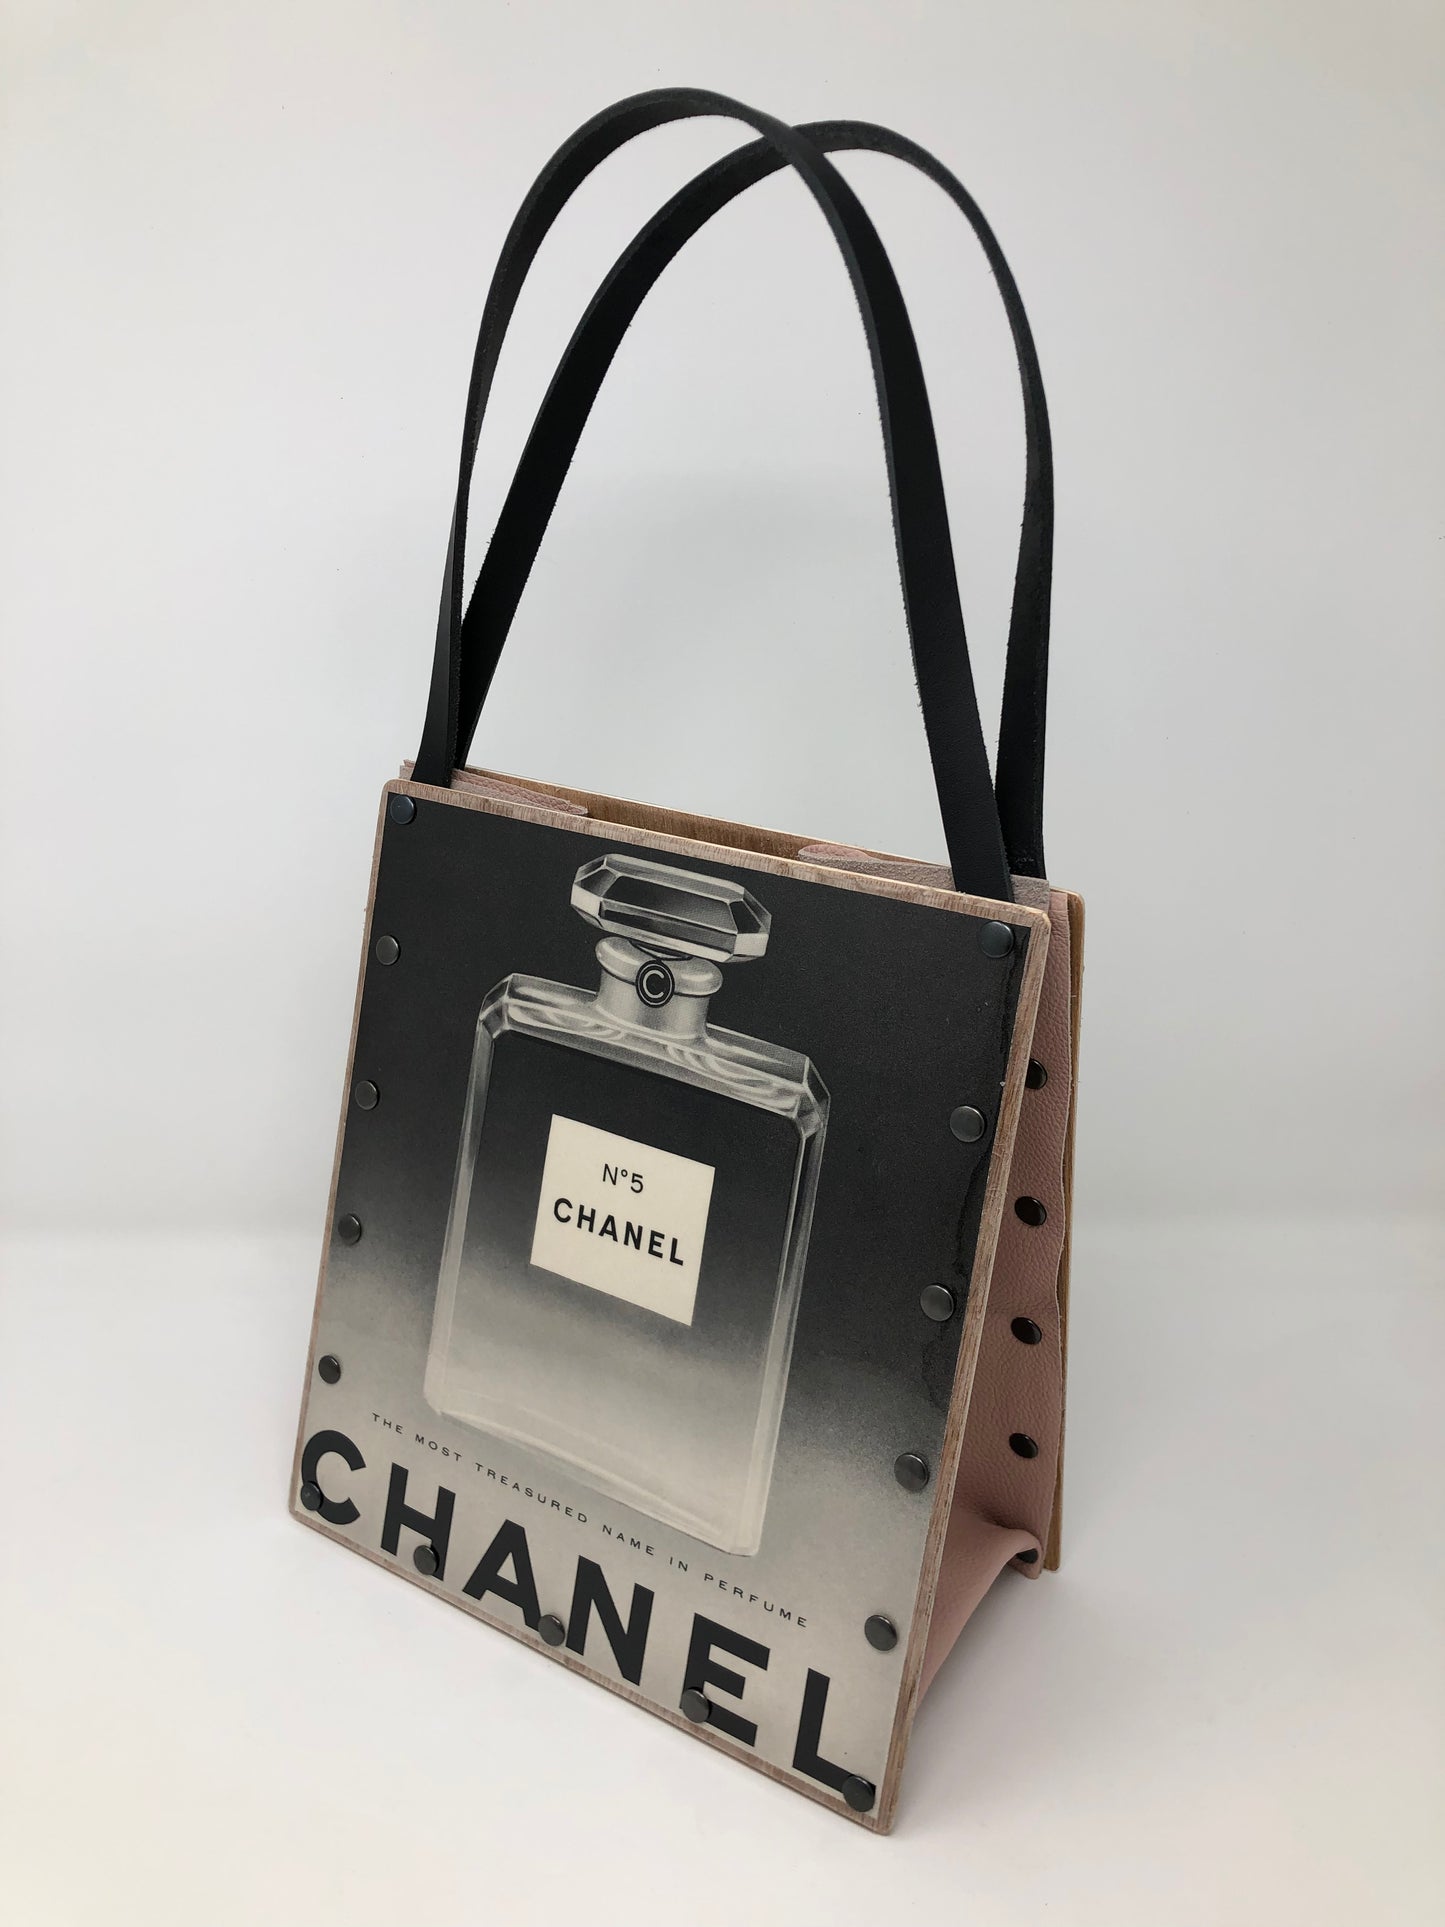 Vintage Graphics Handbag - Beach Vibes Vintage Swim Wear and Chanel No. 5 Ads from Vogue 1959